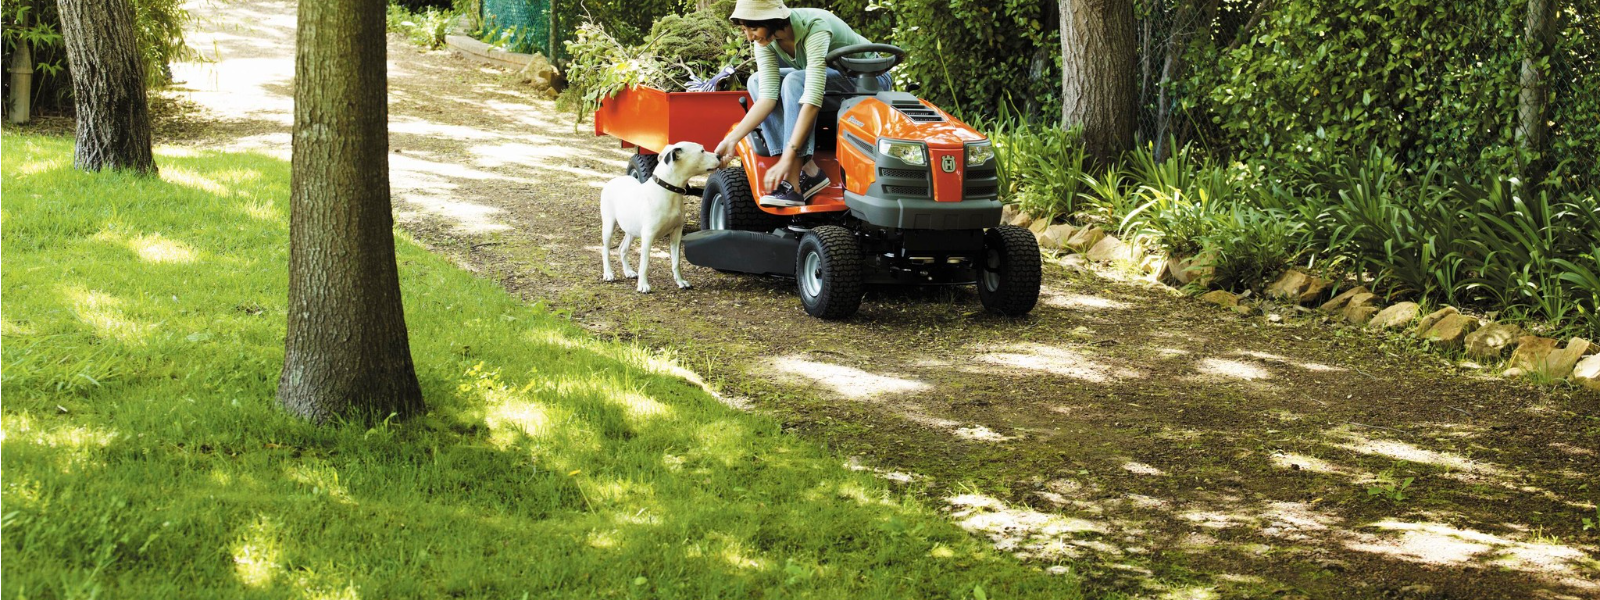 TEMPORE OÜ - Leaf blowers, protective gear, Recreational clothing, robotic lawn mowers, Lawn tractors, Pressure washers a...